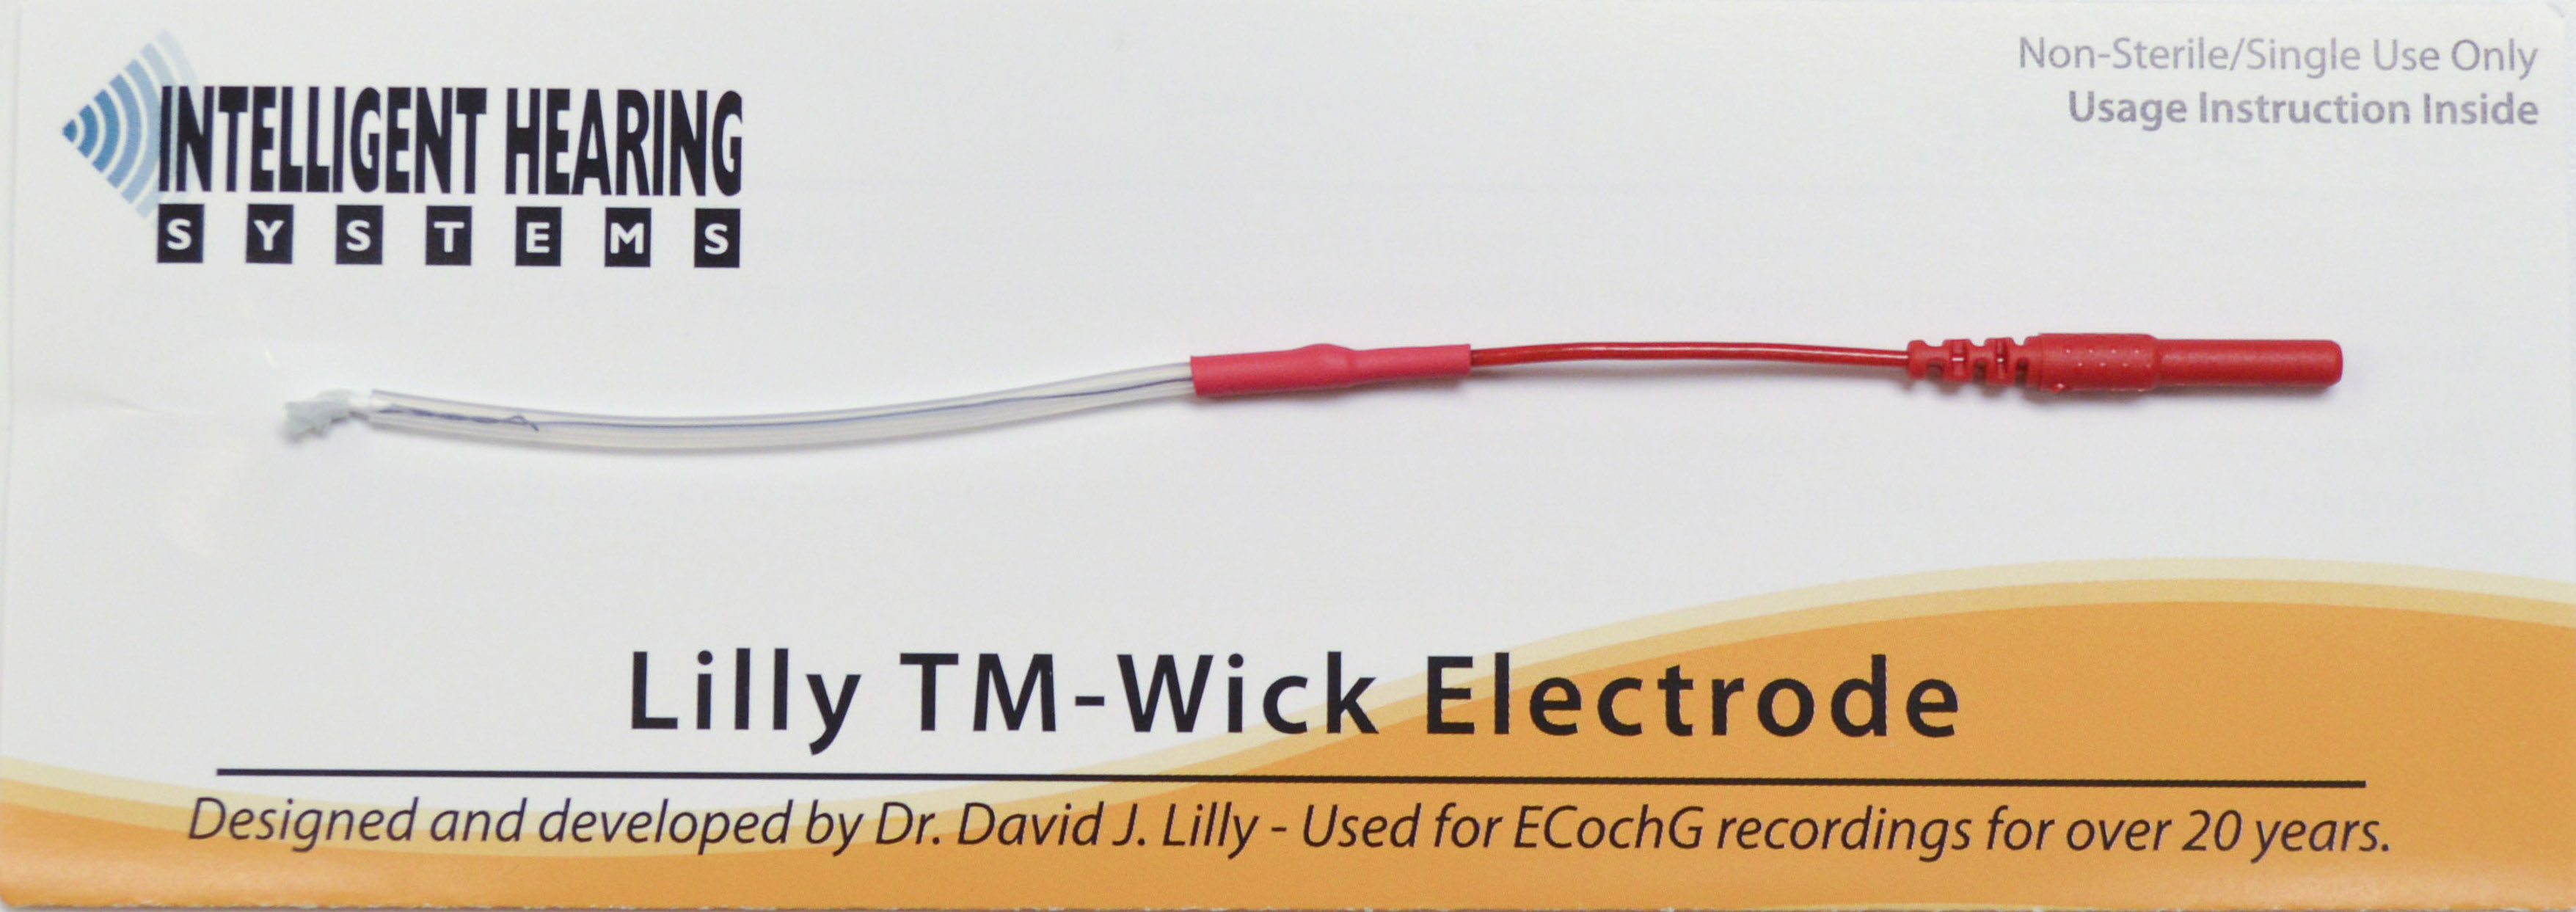 Lilly TM-Wick Electrodes 